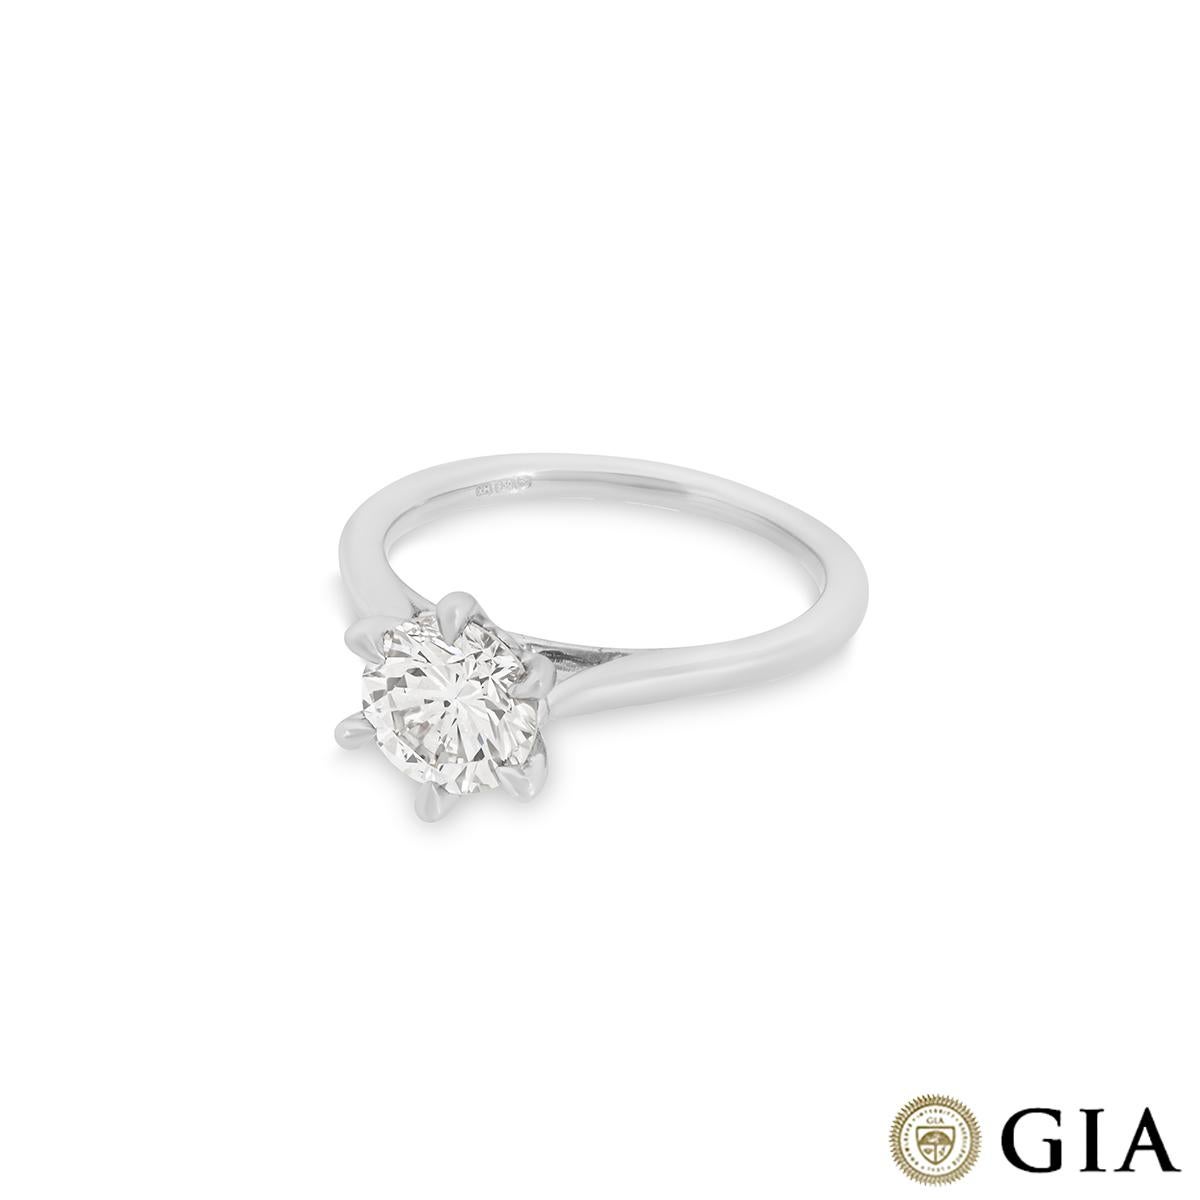 GIA Certified Platinum Round Brilliant Cut Diamond Ring 1.32ct K/SI2 In Excellent Condition For Sale In London, GB